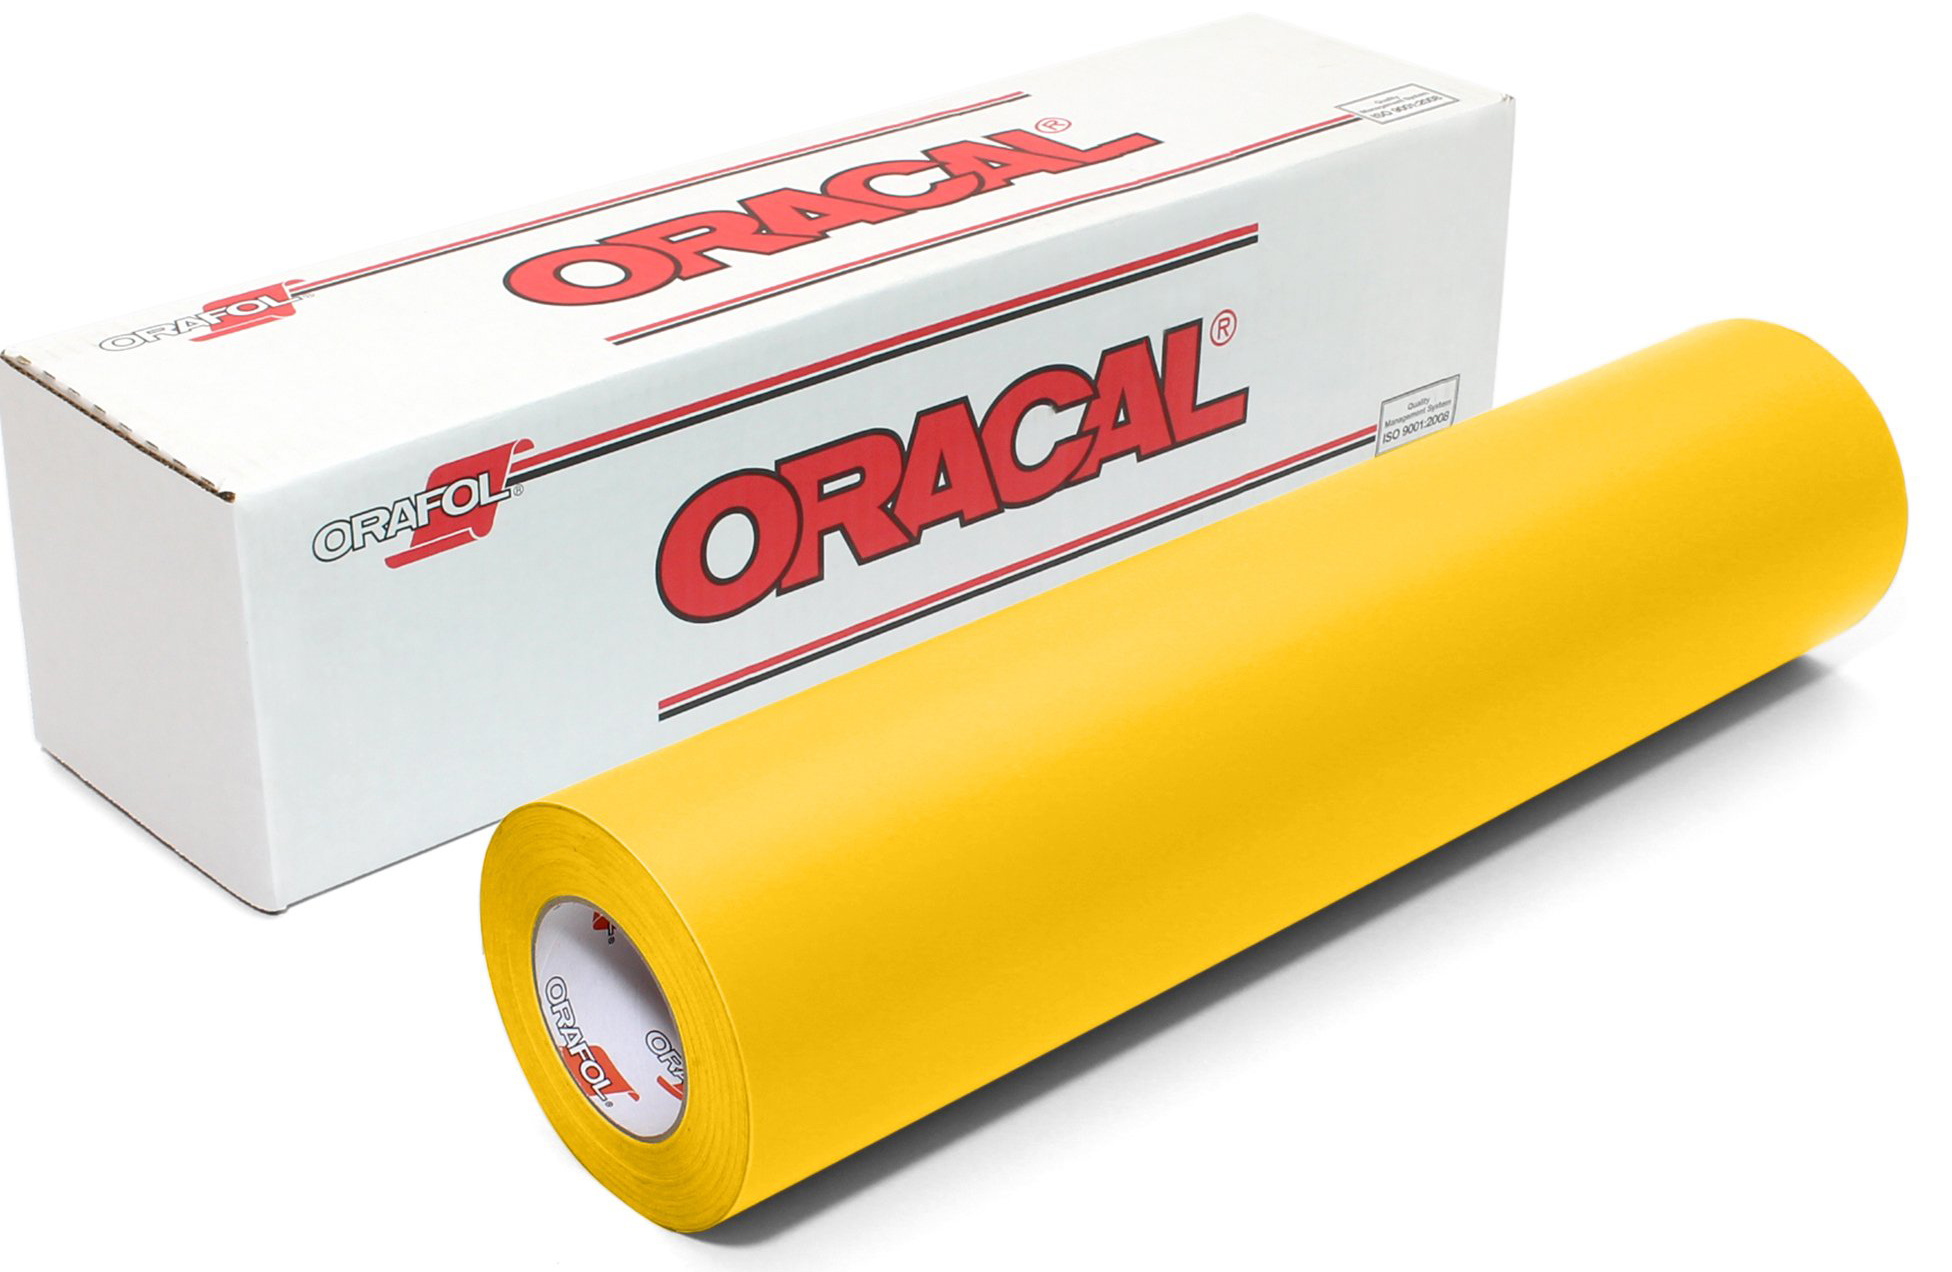 30IN YELLOW 631 EXHIBITION CAL - Oracal 631 Exhibition Calendered PVC Film